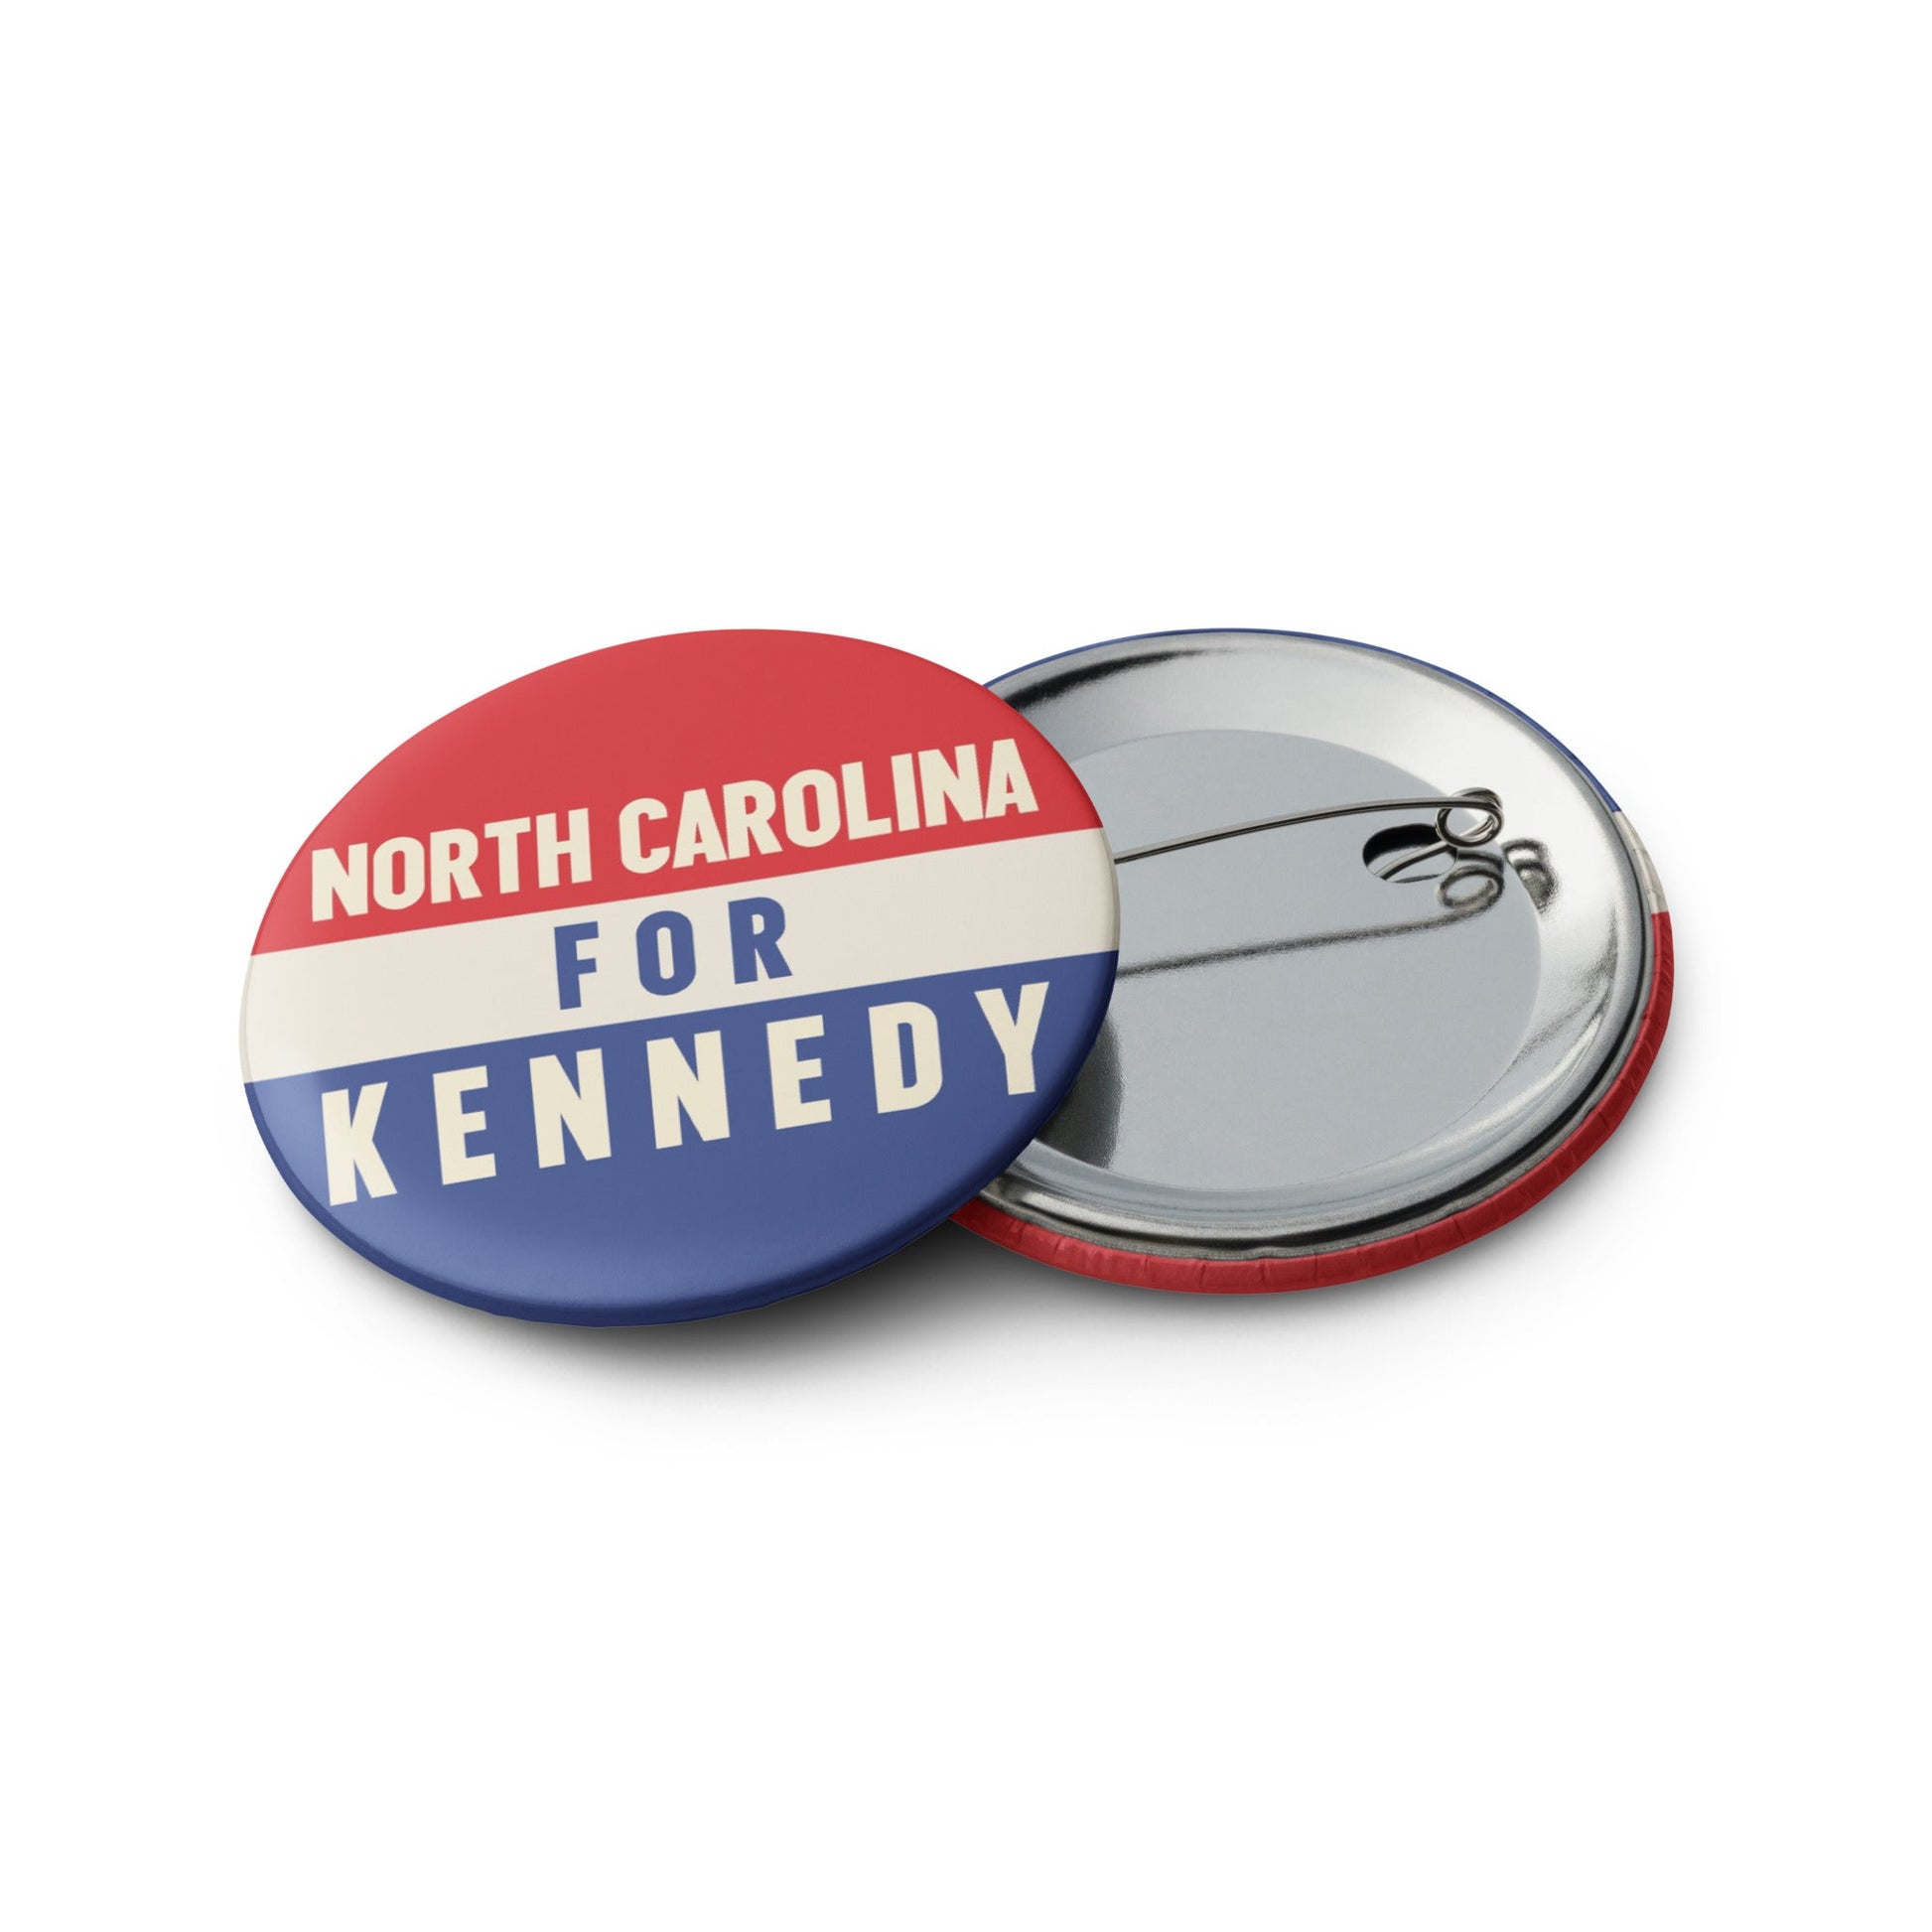 North Carolina for Kennedy (5 Buttons) - TEAM KENNEDY. All rights reserved